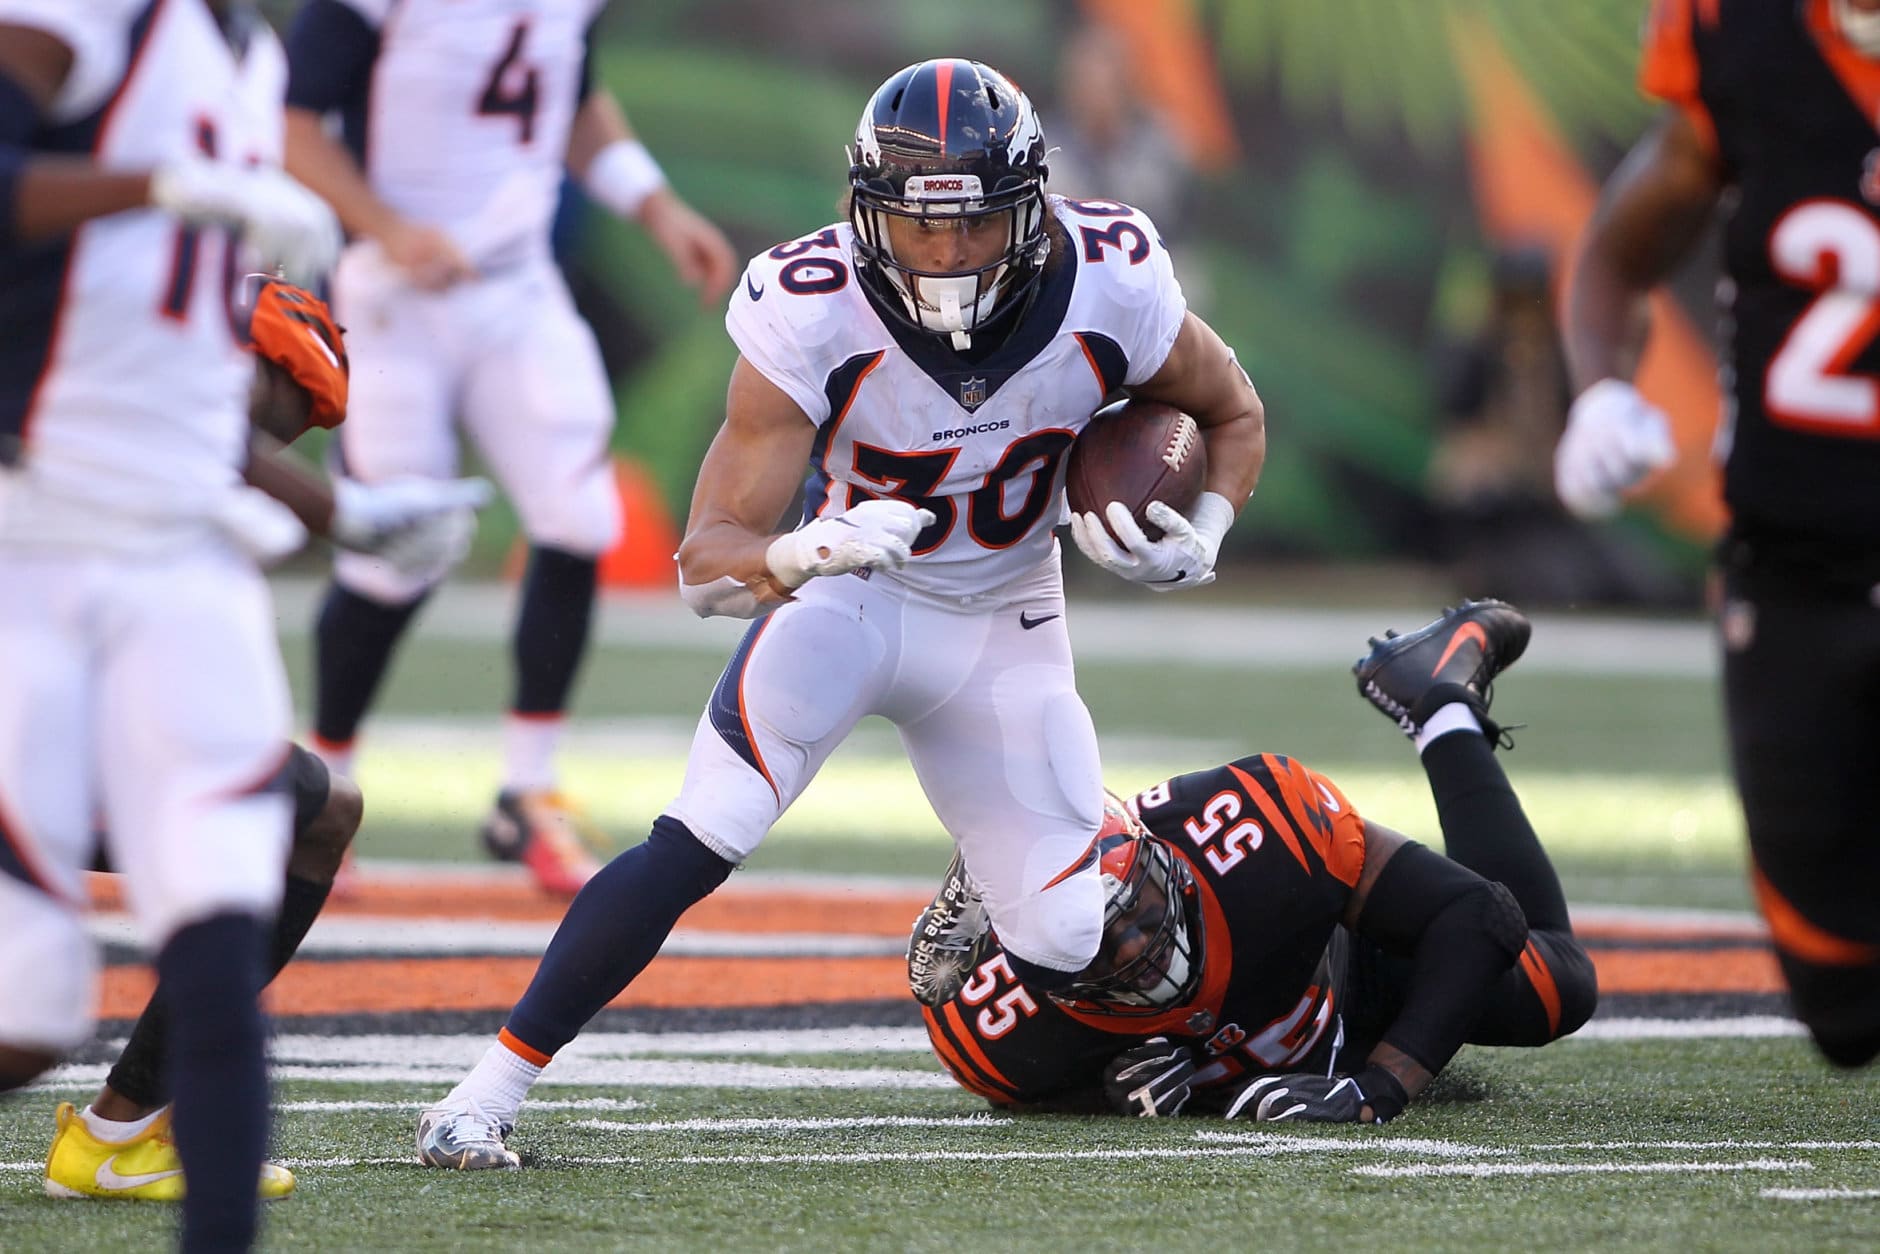 CINCINNATI, OH - DECEMBER 2:  Phillip Lindsay #30 of the Denver Broncos slips out of an attempted tackle by Vontaze Burfict #55 of the Cincinnati Bengals during the second quarter at Paul Brown Stadium on December 2, 2018 in Cincinnati, Ohio. (Photo by John Grieshop/Getty Images)